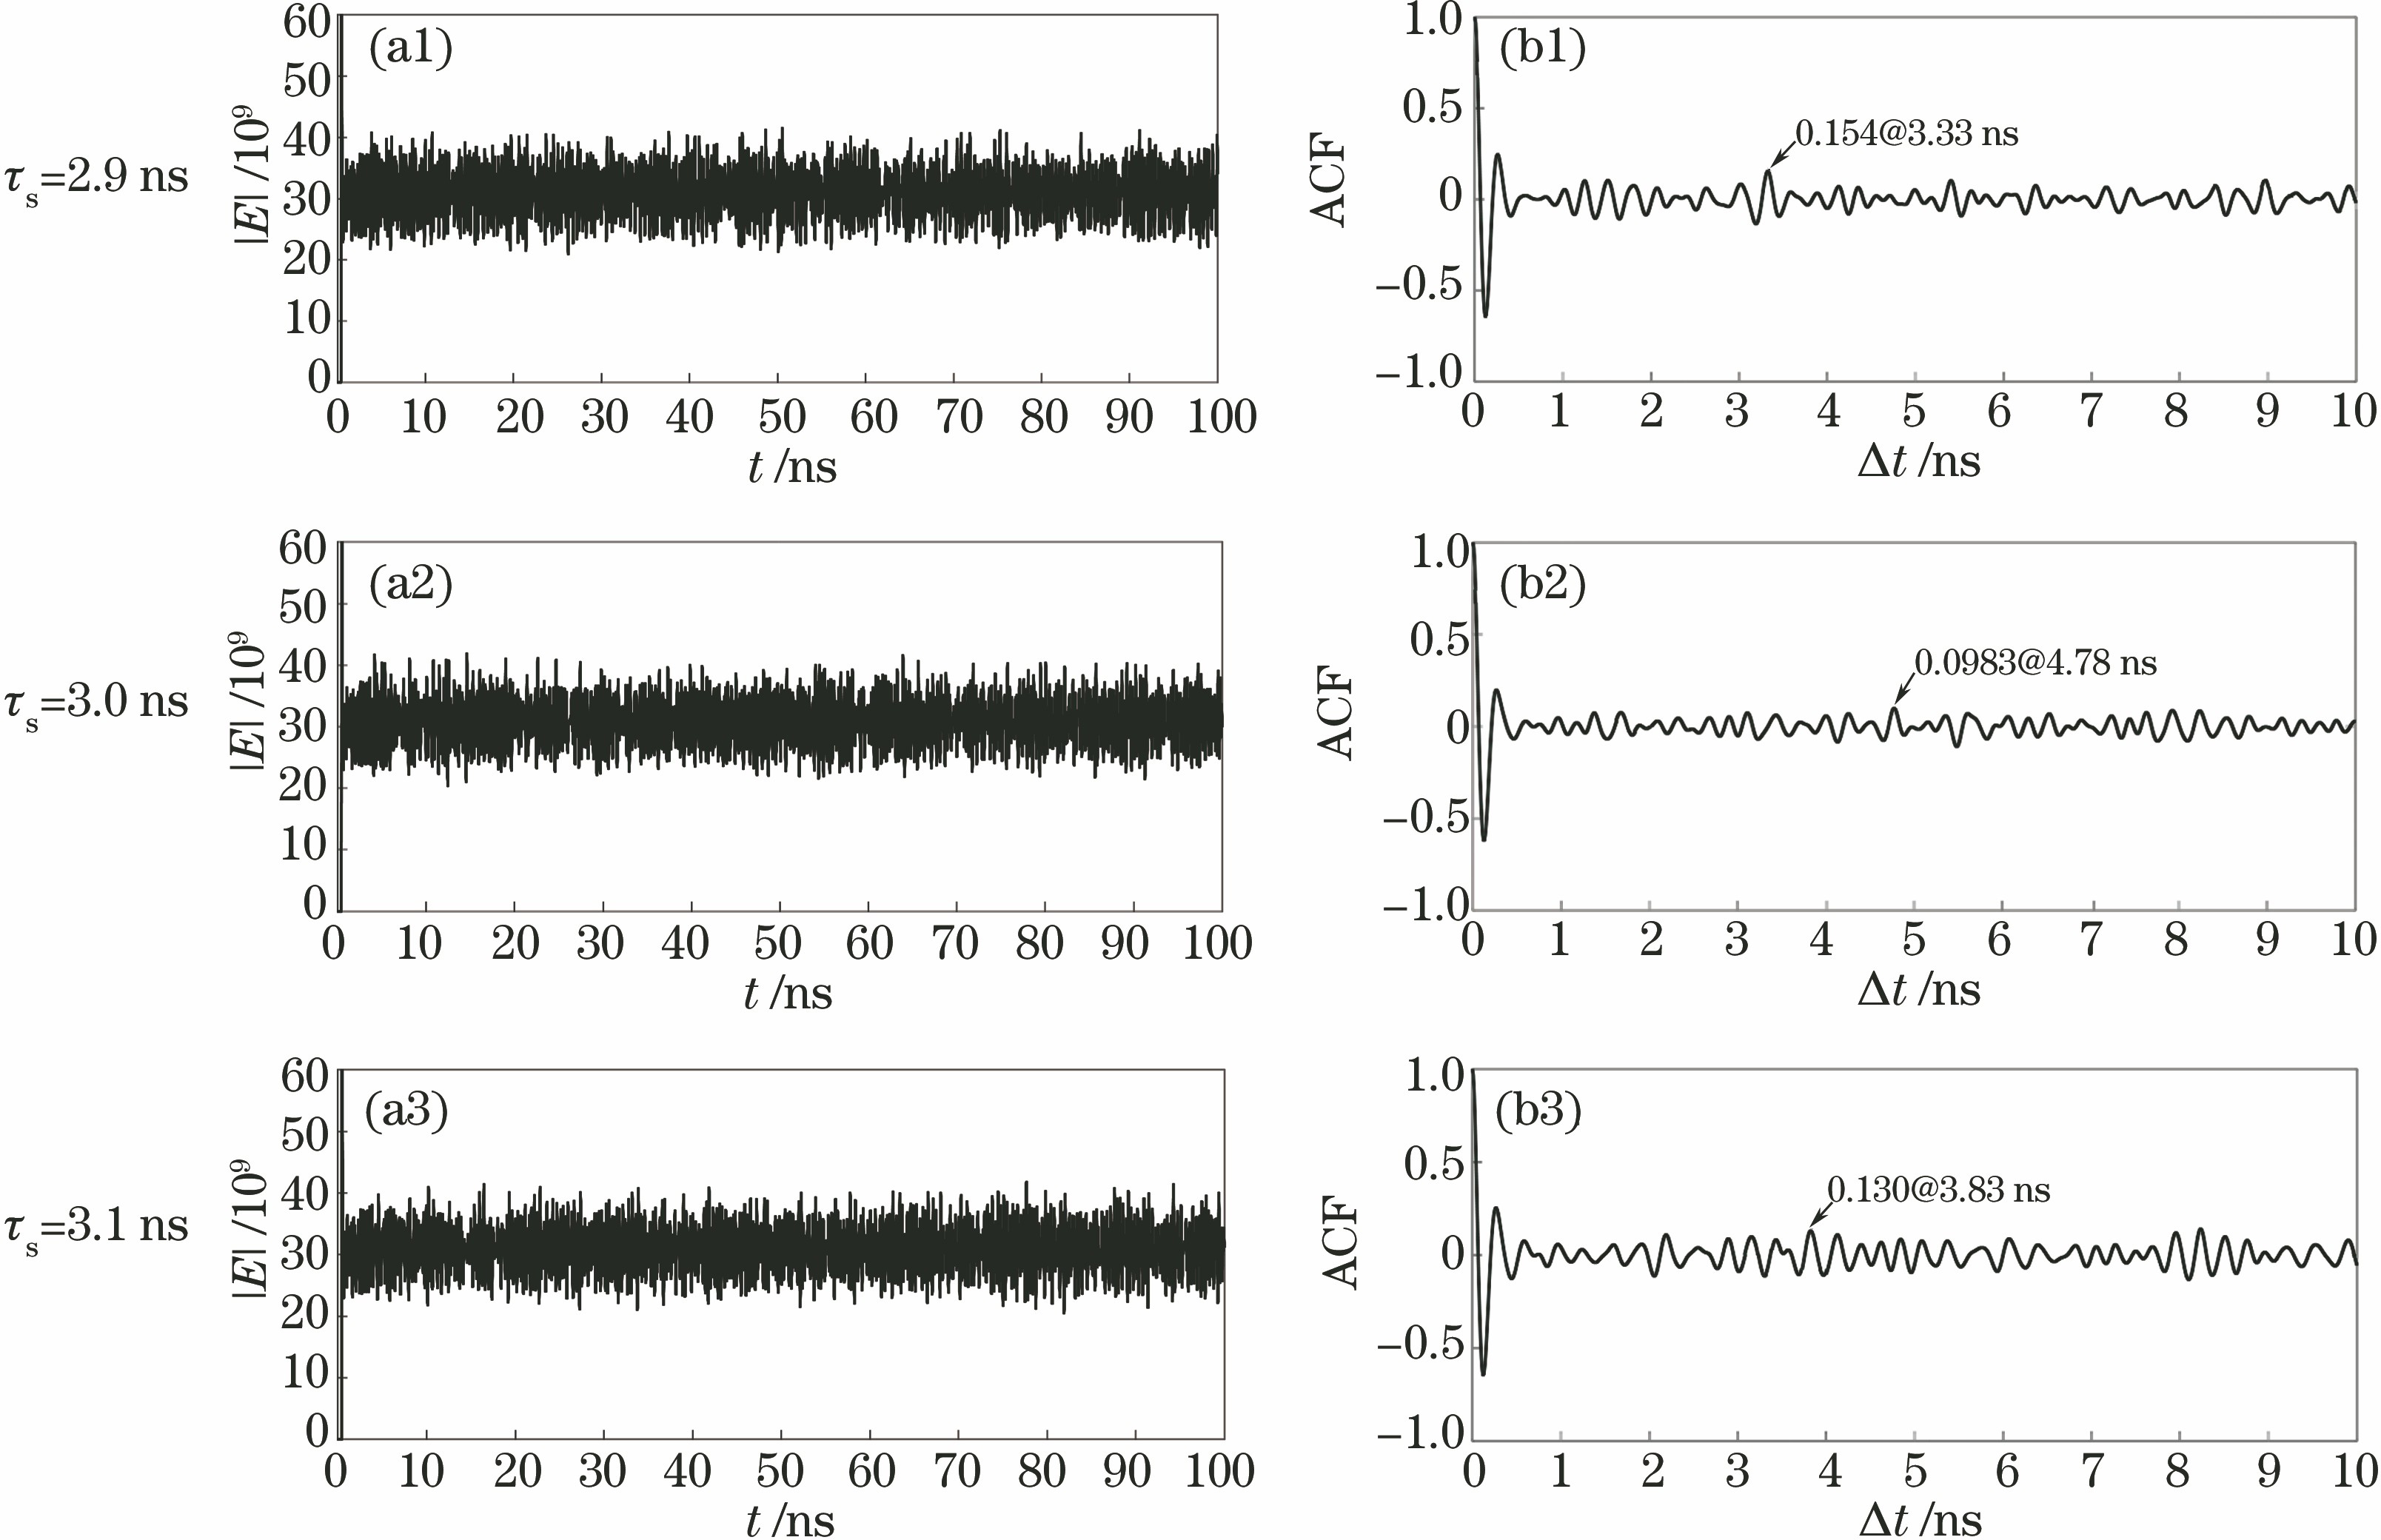 Time series and the corresponding ACF curves of chaotic laser output from the system under the different delay time. (a1)--(a3) Time series; (b1)--(b3) ACF curves